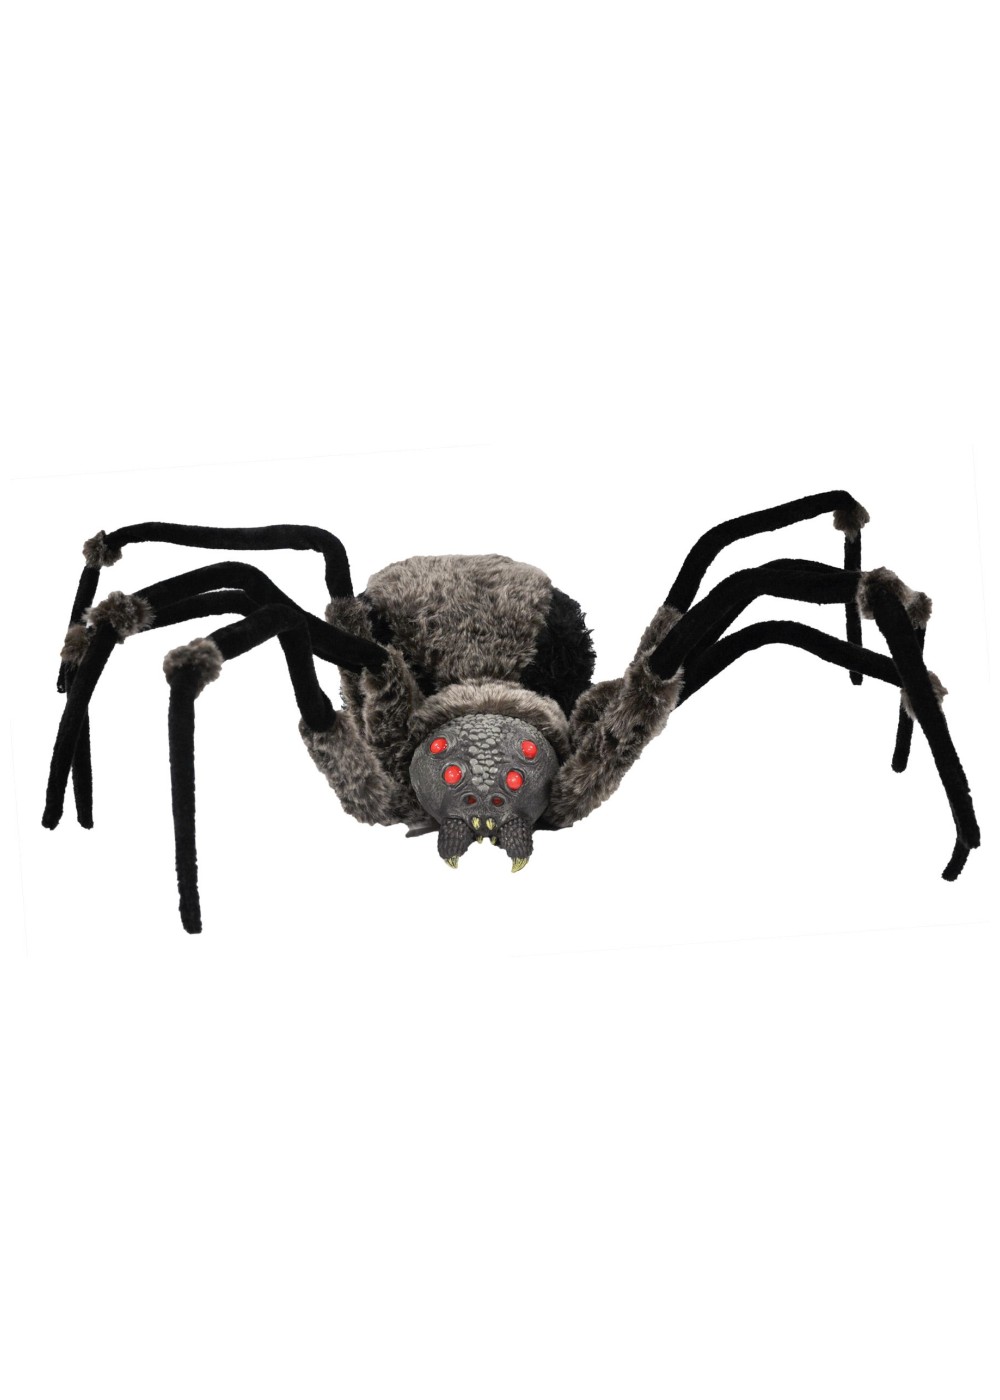 Giant Spider With Led Eyes